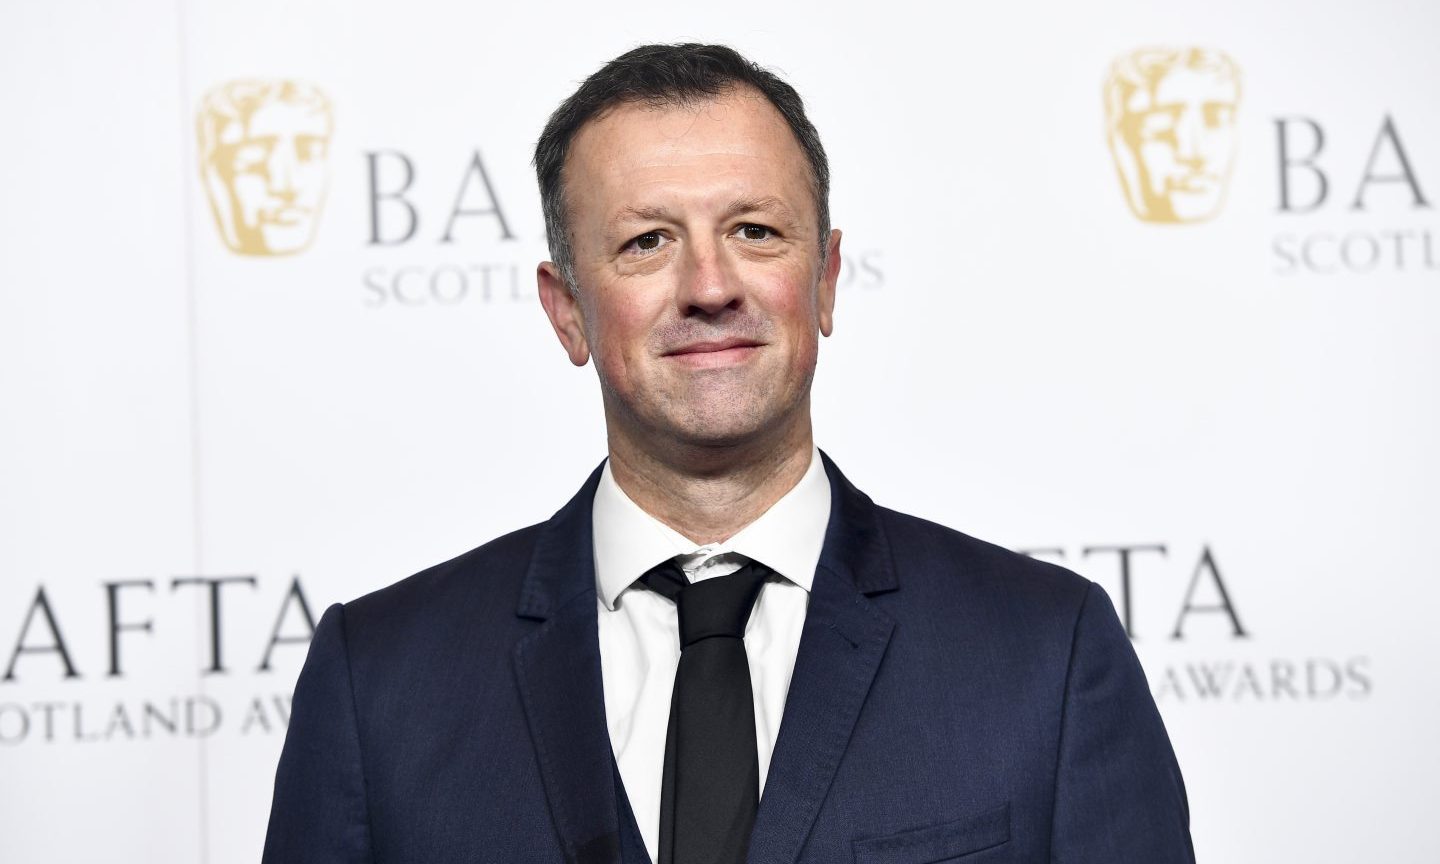 Scottish author Neil Forsyth shares what it was like growing up in Broughty Ferry. Image: Bafta Scotland.